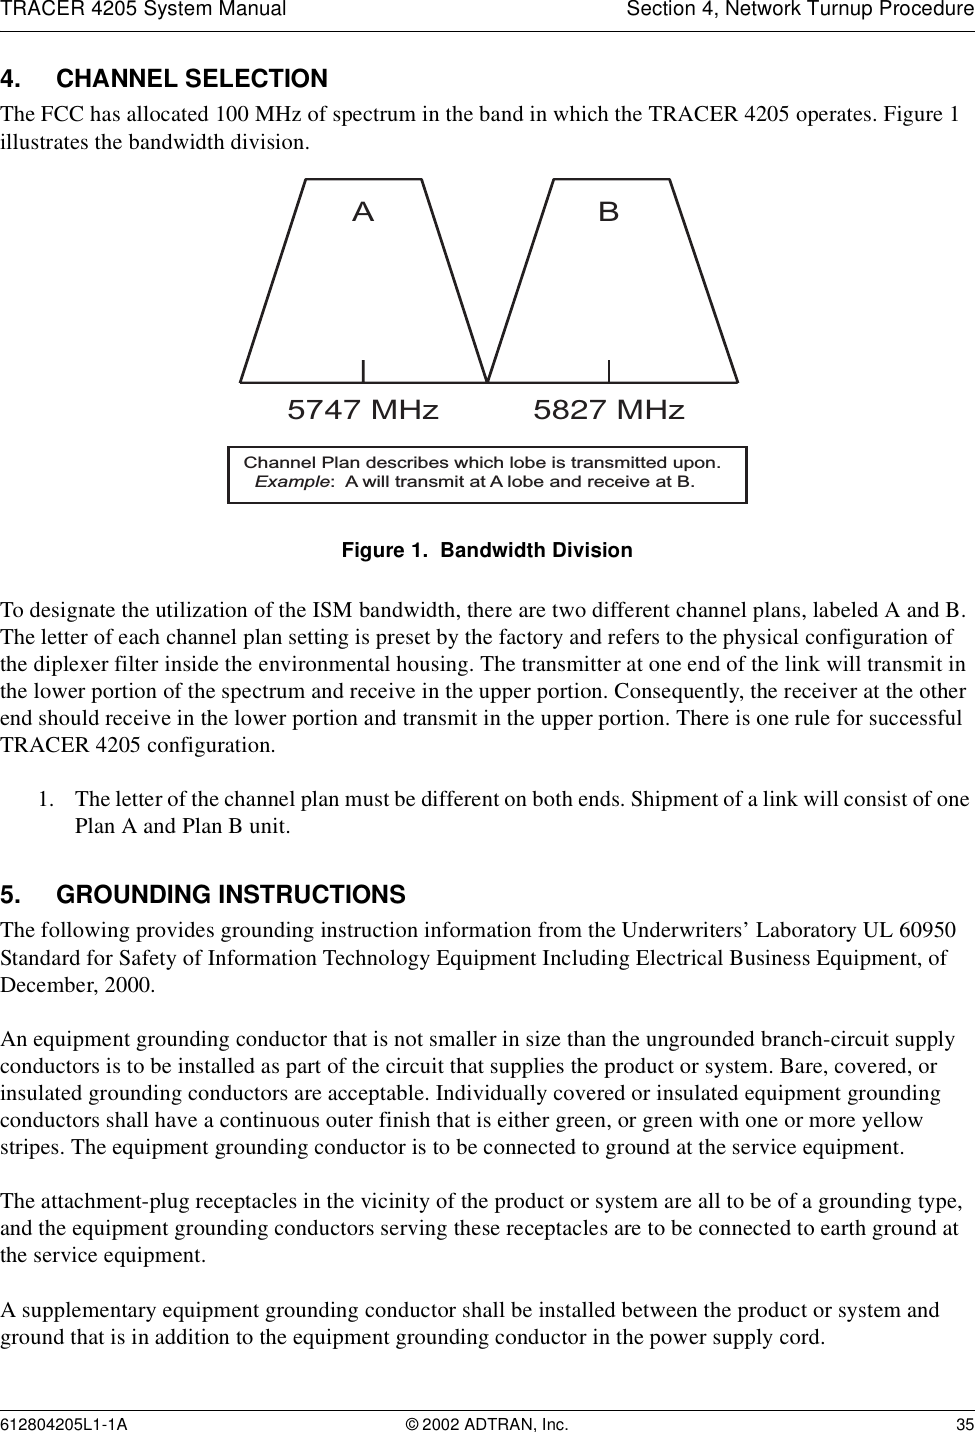 TRACER 4205 System Manual Section 4, Network Turnup Procedure612804205L1-1A © 2002 ADTRAN, Inc. 354. CHANNEL SELECTIONThe FCC has allocated 100 MHz of spectrum in the band in which the TRACER 4205 operates. Figure 1 illustrates the bandwidth division. Figure 1.  Bandwidth DivisionTo designate the utilization of the ISM bandwidth, there are two different channel plans, labeled A and B. The letter of each channel plan setting is preset by the factory and refers to the physical configuration of the diplexer filter inside the environmental housing. The transmitter at one end of the link will transmit in the lower portion of the spectrum and receive in the upper portion. Consequently, the receiver at the other end should receive in the lower portion and transmit in the upper portion. There is one rule for successful TRACER 4205 configuration.1. The letter of the channel plan must be different on both ends. Shipment of a link will consist of one Plan A and Plan B unit.5. GROUNDING INSTRUCTIONSThe following provides grounding instruction information from the Underwriters’ Laboratory UL 60950 Standard for Safety of Information Technology Equipment Including Electrical Business Equipment, of December, 2000.An equipment grounding conductor that is not smaller in size than the ungrounded branch-circuit supply conductors is to be installed as part of the circuit that supplies the product or system. Bare, covered, or insulated grounding conductors are acceptable. Individually covered or insulated equipment grounding conductors shall have a continuous outer finish that is either green, or green with one or more yellow stripes. The equipment grounding conductor is to be connected to ground at the service equipment.The attachment-plug receptacles in the vicinity of the product or system are all to be of a grounding type, and the equipment grounding conductors serving these receptacles are to be connected to earth ground at the service equipment.A supplementary equipment grounding conductor shall be installed between the product or system and ground that is in addition to the equipment grounding conductor in the power supply cord.A5747 MHzB5827 MHzChannel Plan describes which lobe is transmitted upon.  Example:  A will transmit at A lobe and receive at B.